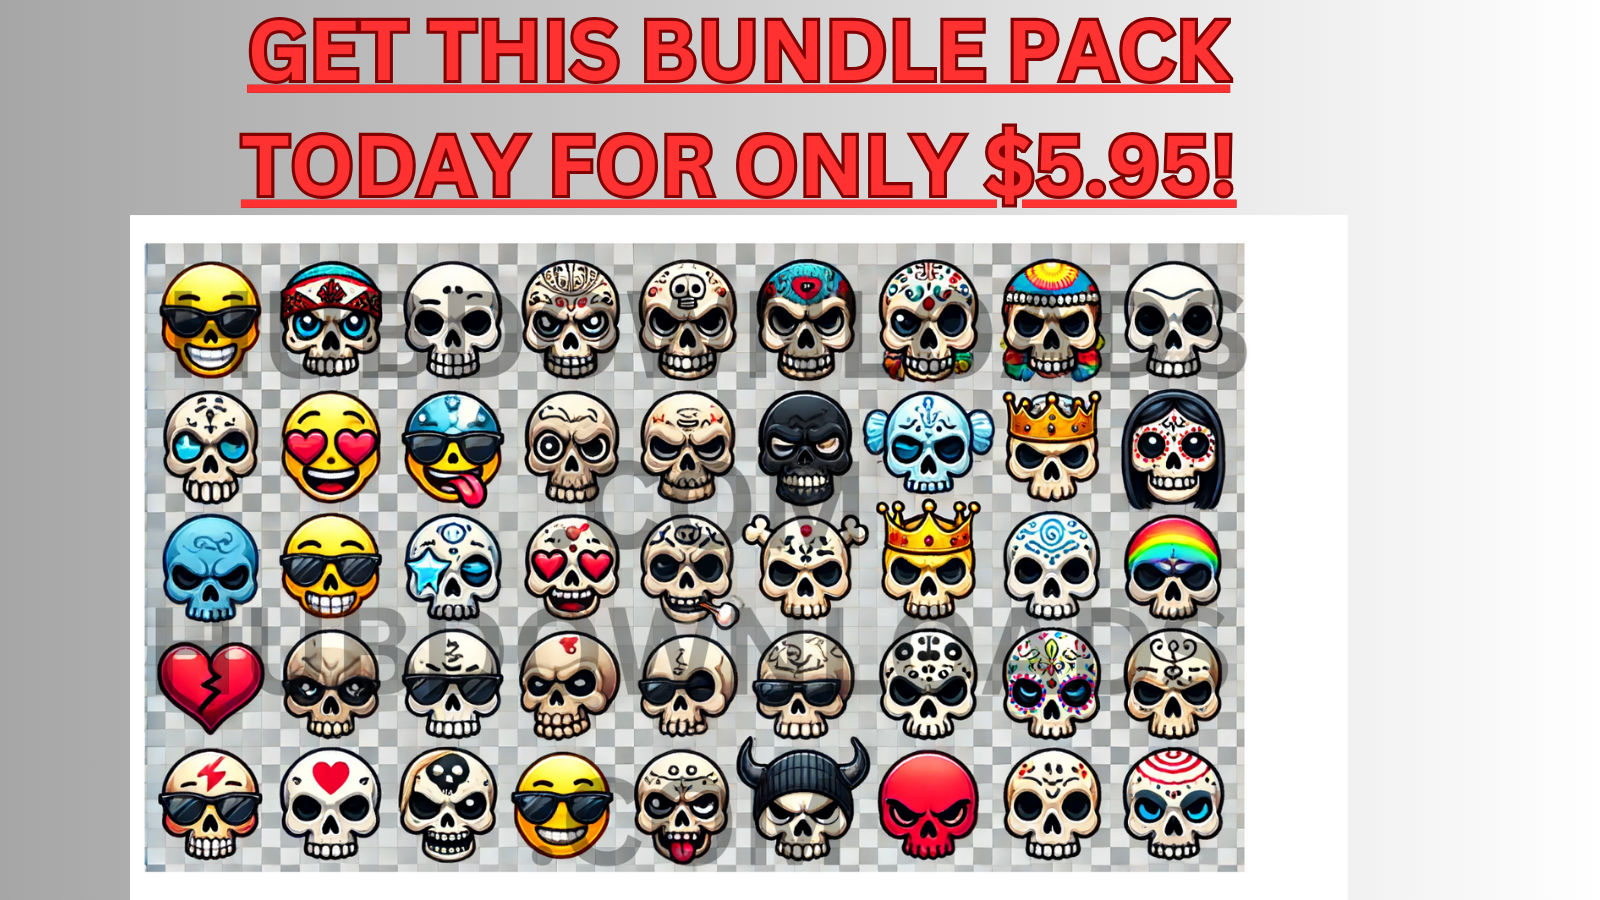 "Explore our collection of 72 unique skull emojis, designed with transparent backgrounds. Ideal for enhancing your digital projects, social media posts, and creative designs. Each emoji showcases a variety of styles and expressions."